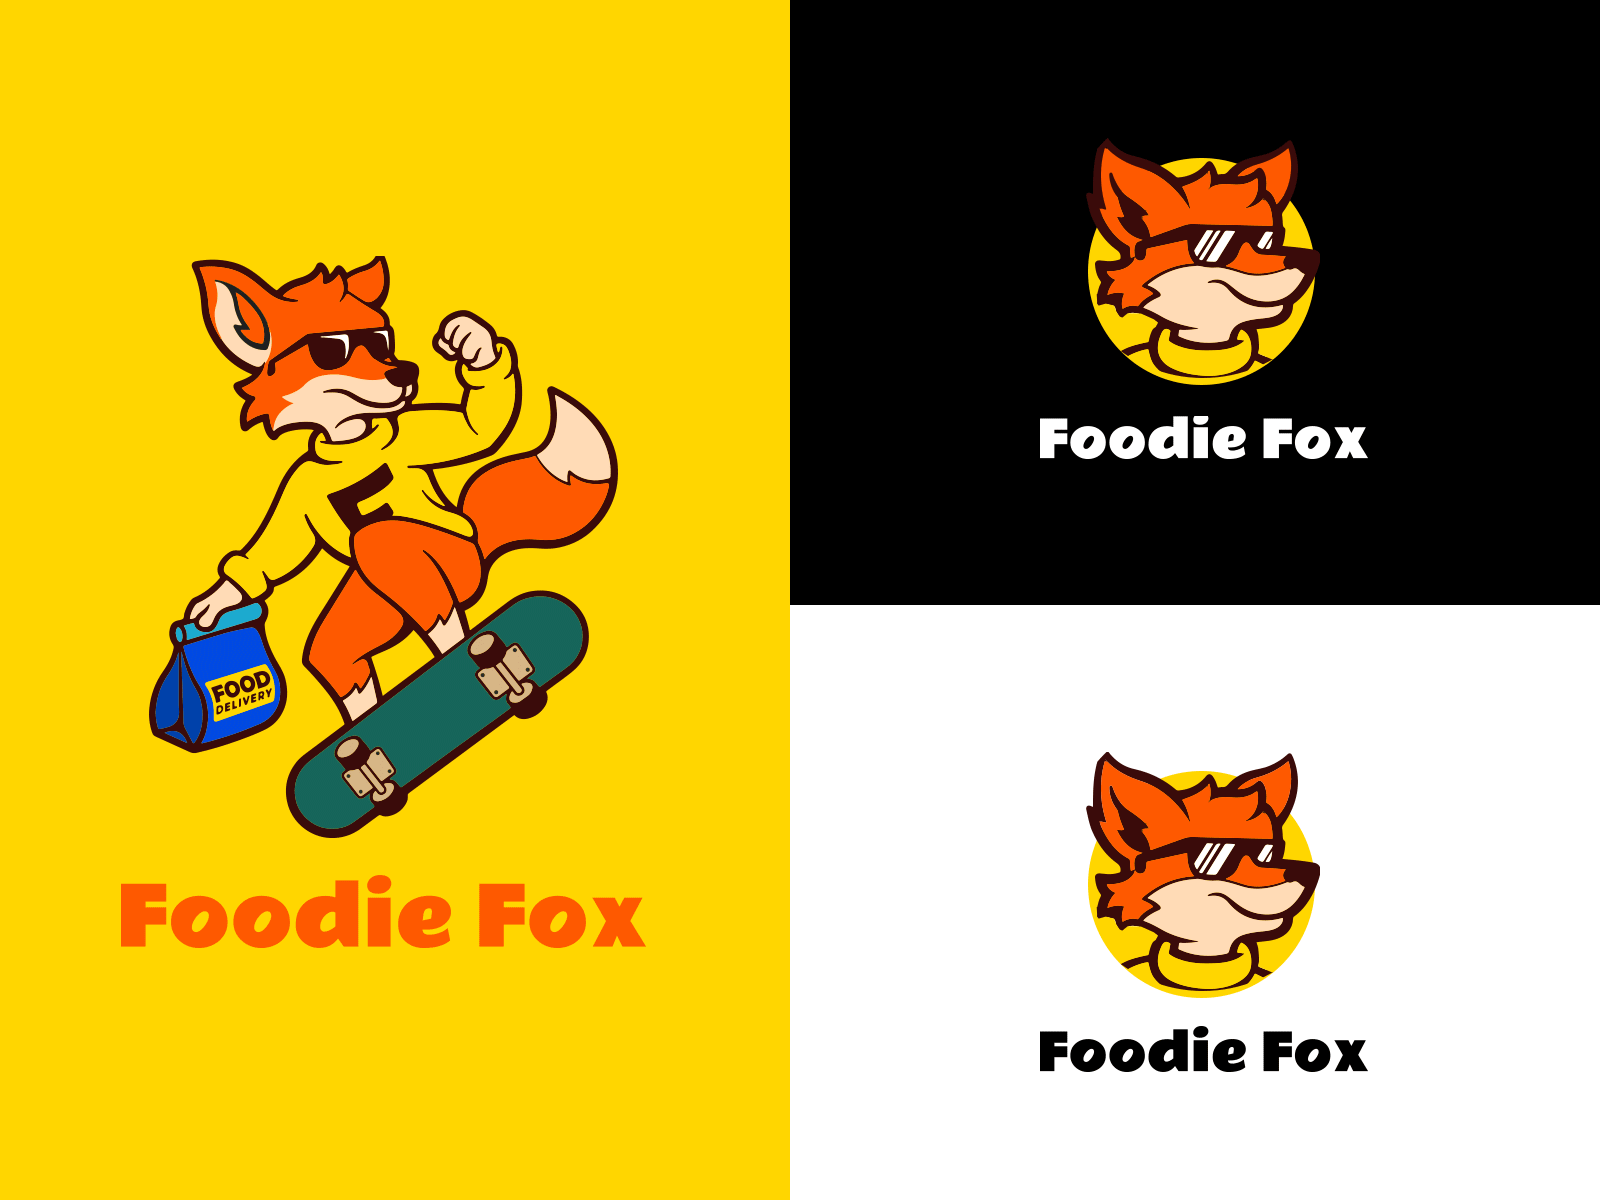 Food delivery logo design - Foodie Fox character logo creative logo food delivery logo foodie logo fox character fox logo design logo logo animation logo design logo gif logo sketch mascot logo online food logo